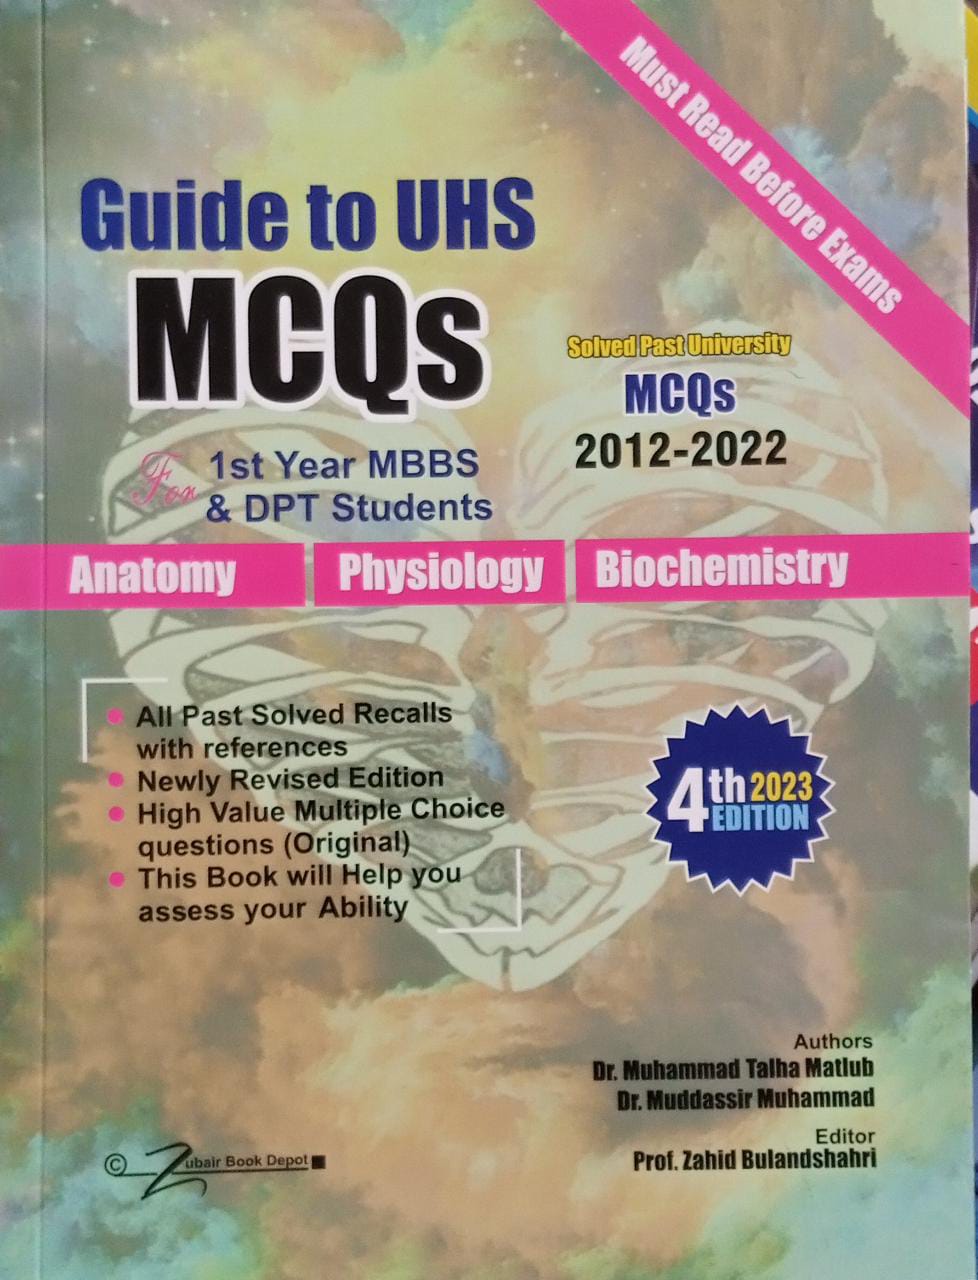 guide to uhs mcqs for 1st  year mbbs & dpt students anatomy, physiology,biochemistry, 4e